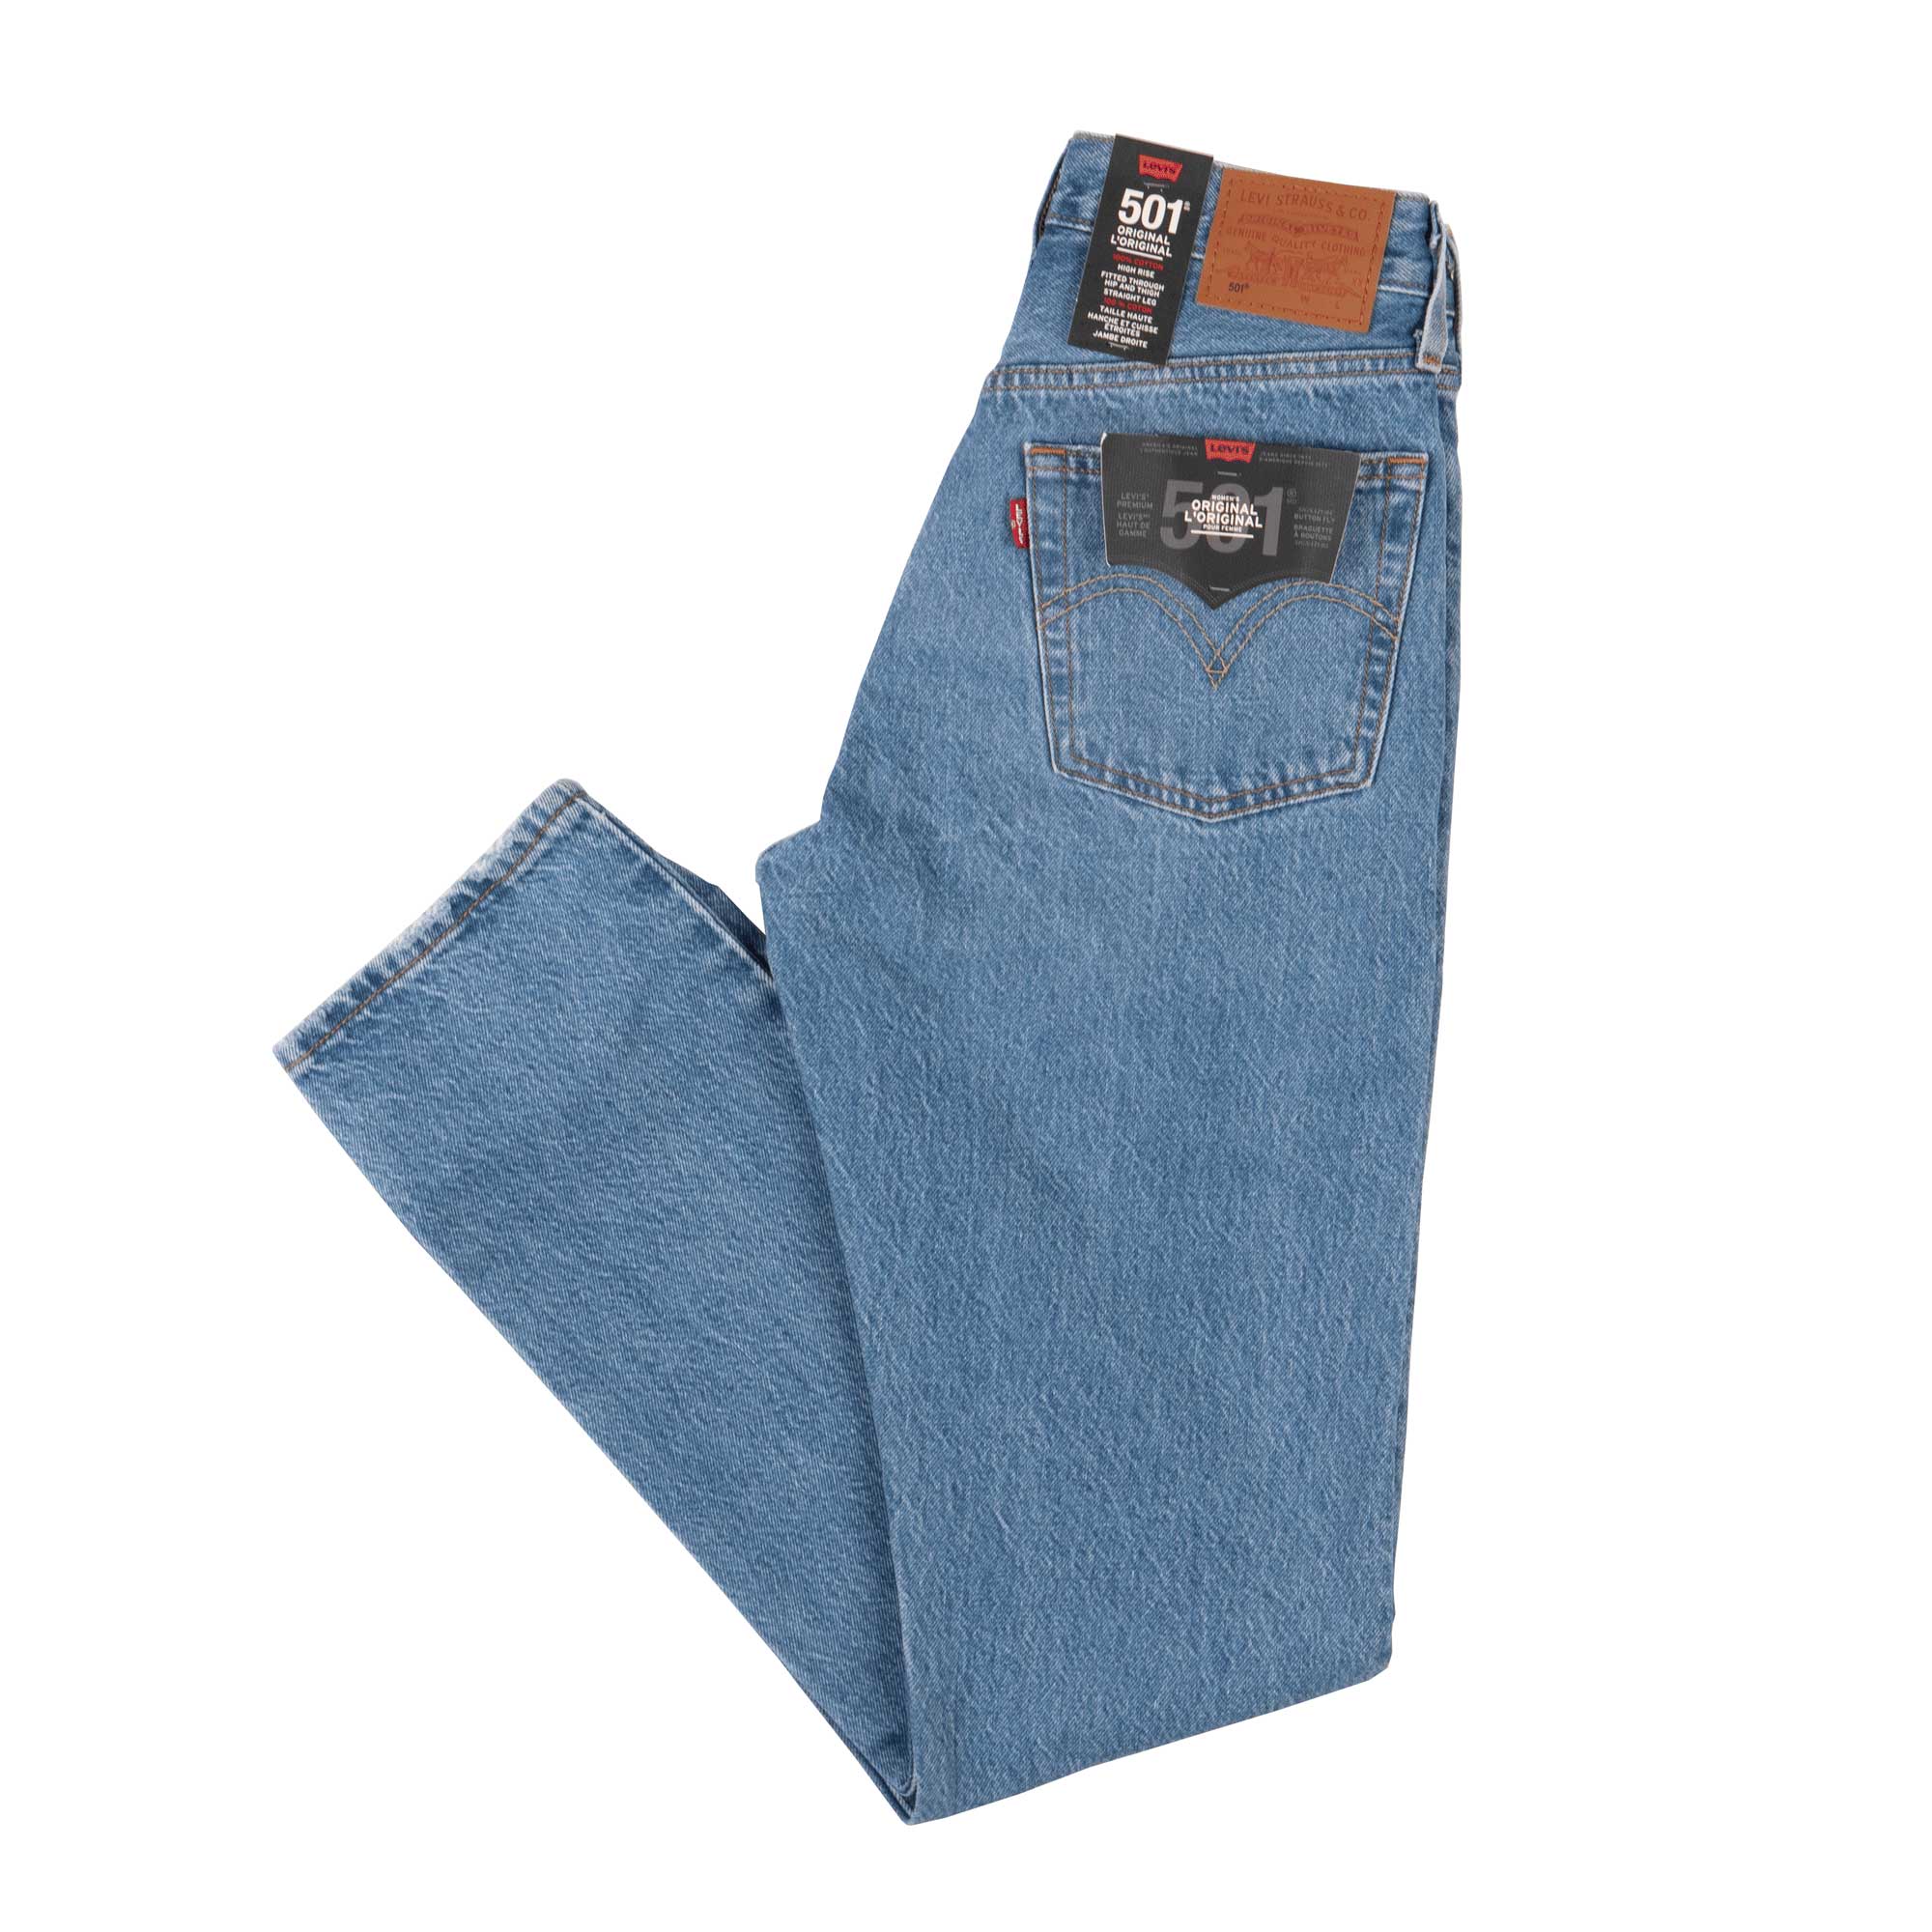 Levi's 501® Jeans For Women